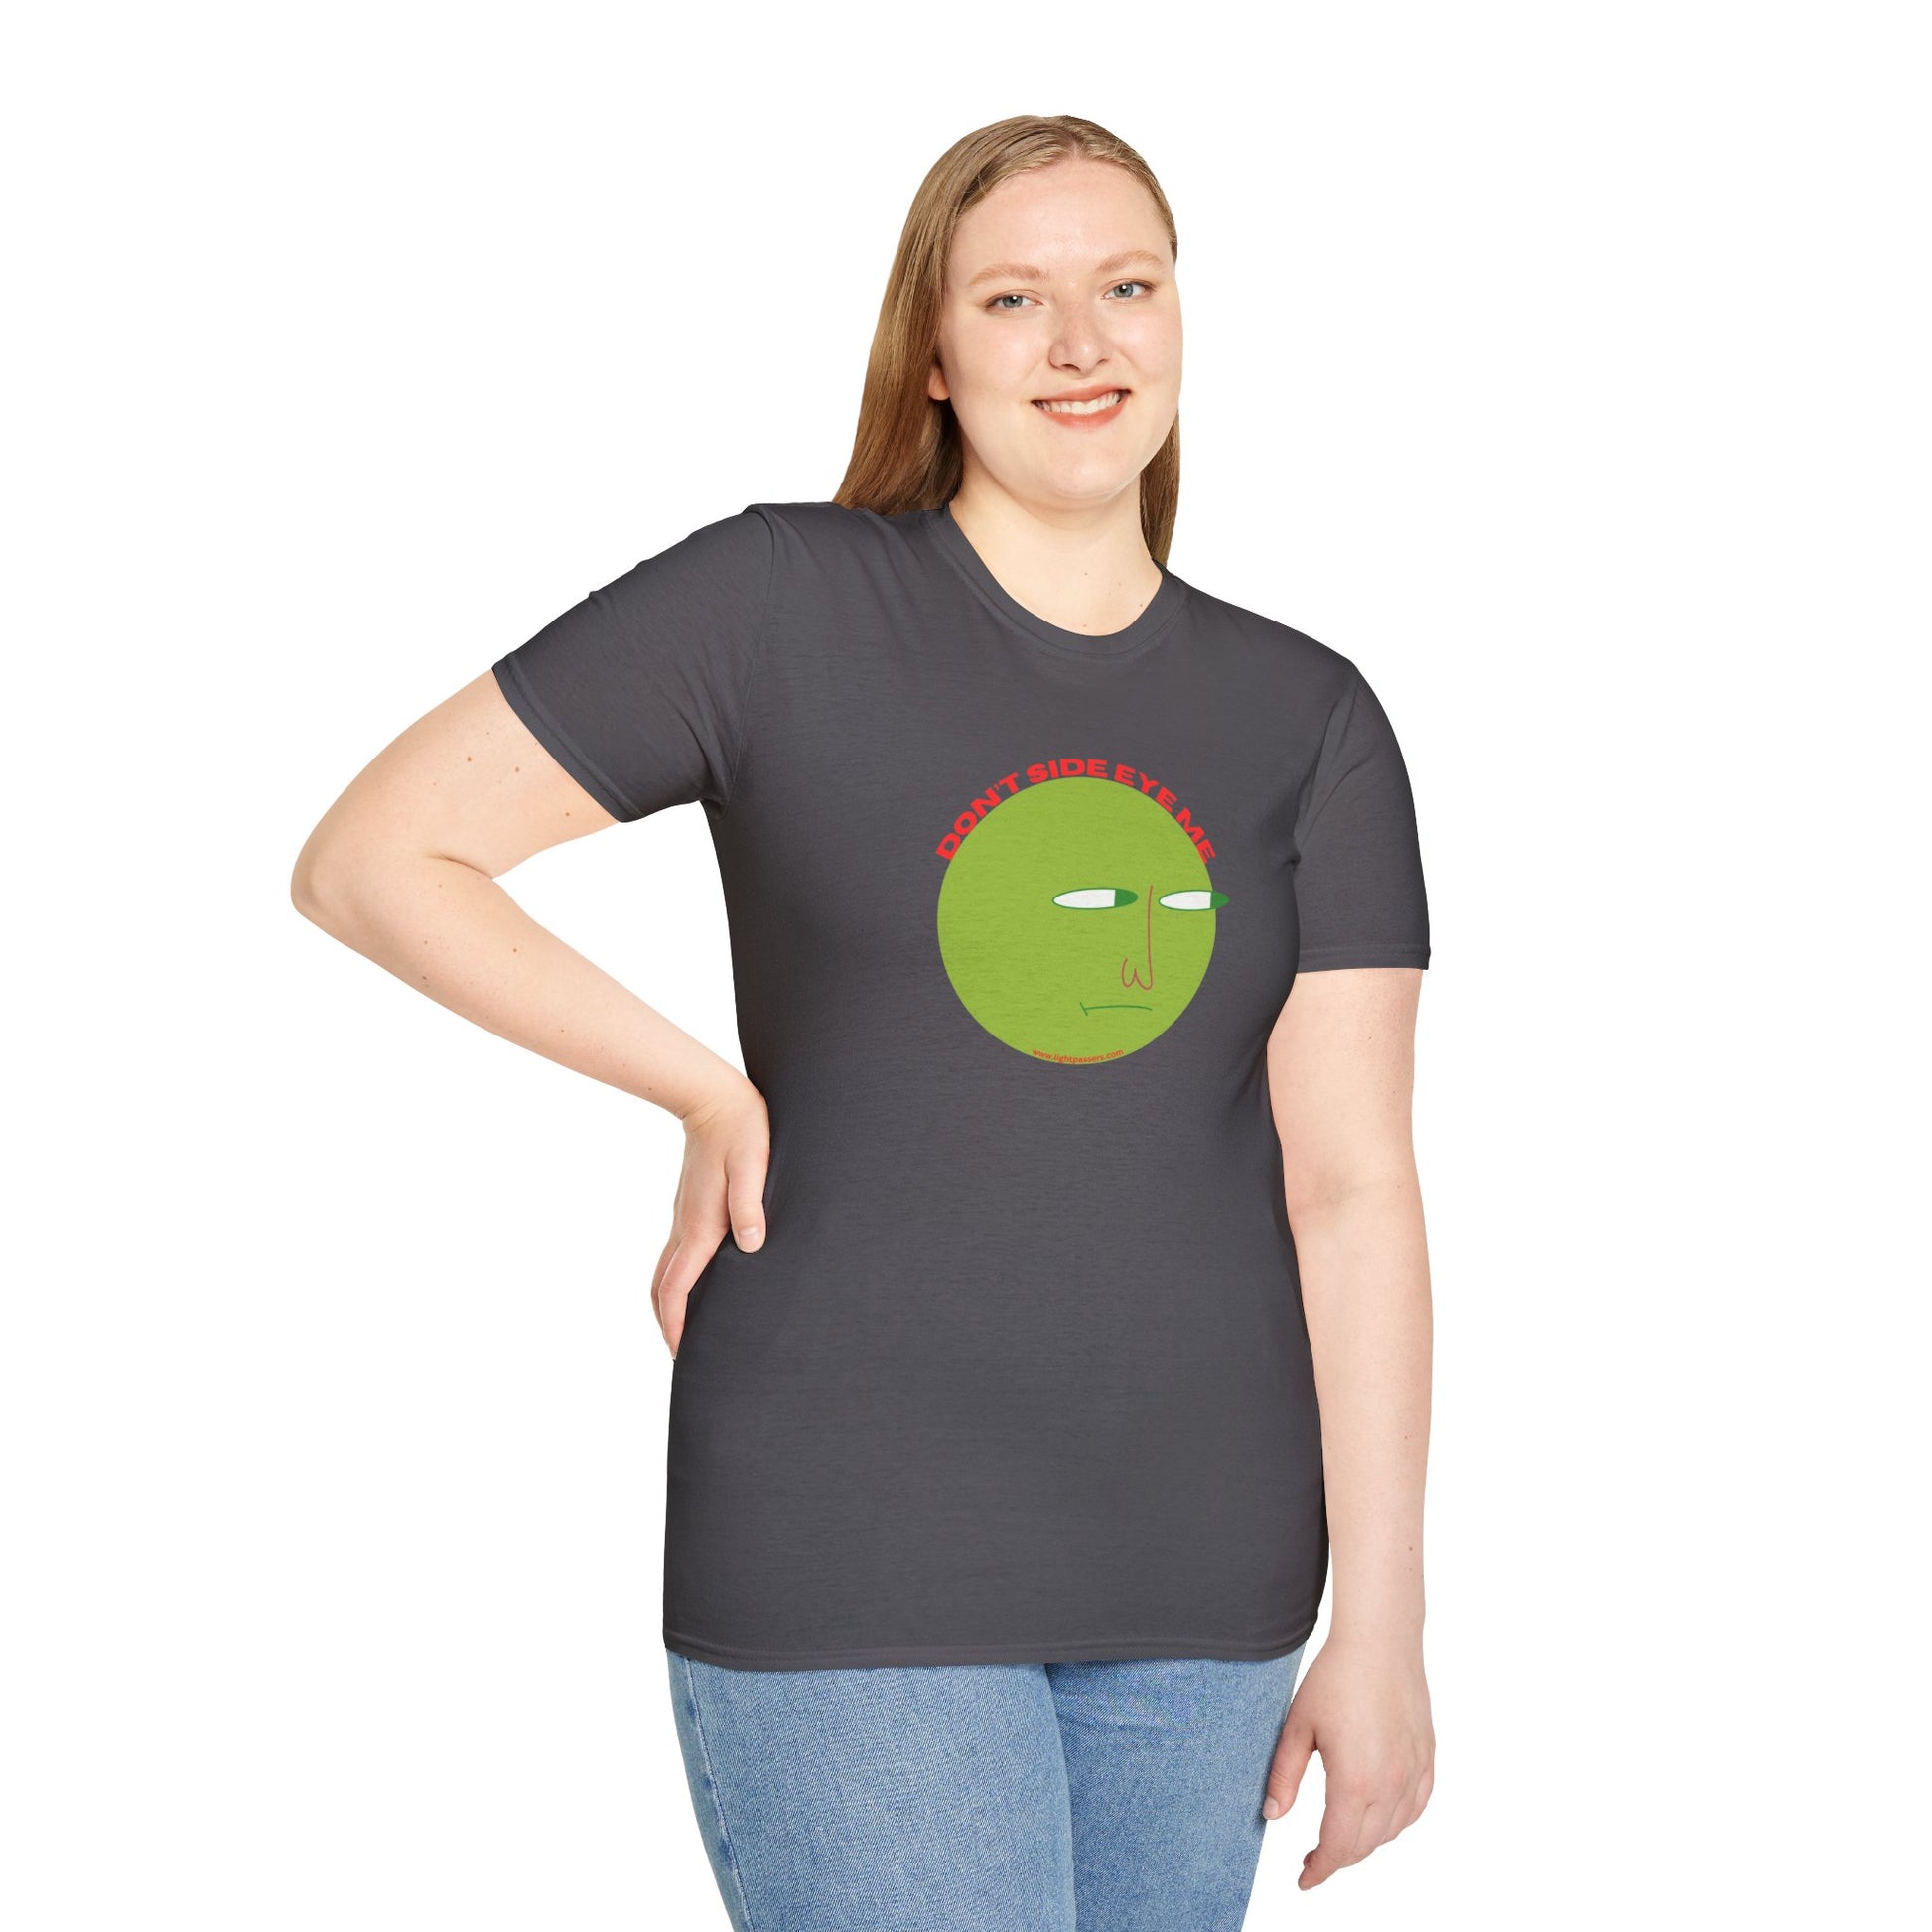 A woman in a grey shirt with a green face graphic poses, showcasing the Don't Side Eye Me unisex t-shirt. Made of soft 100% cotton, featuring twill tape shoulders and a ribbed collar.